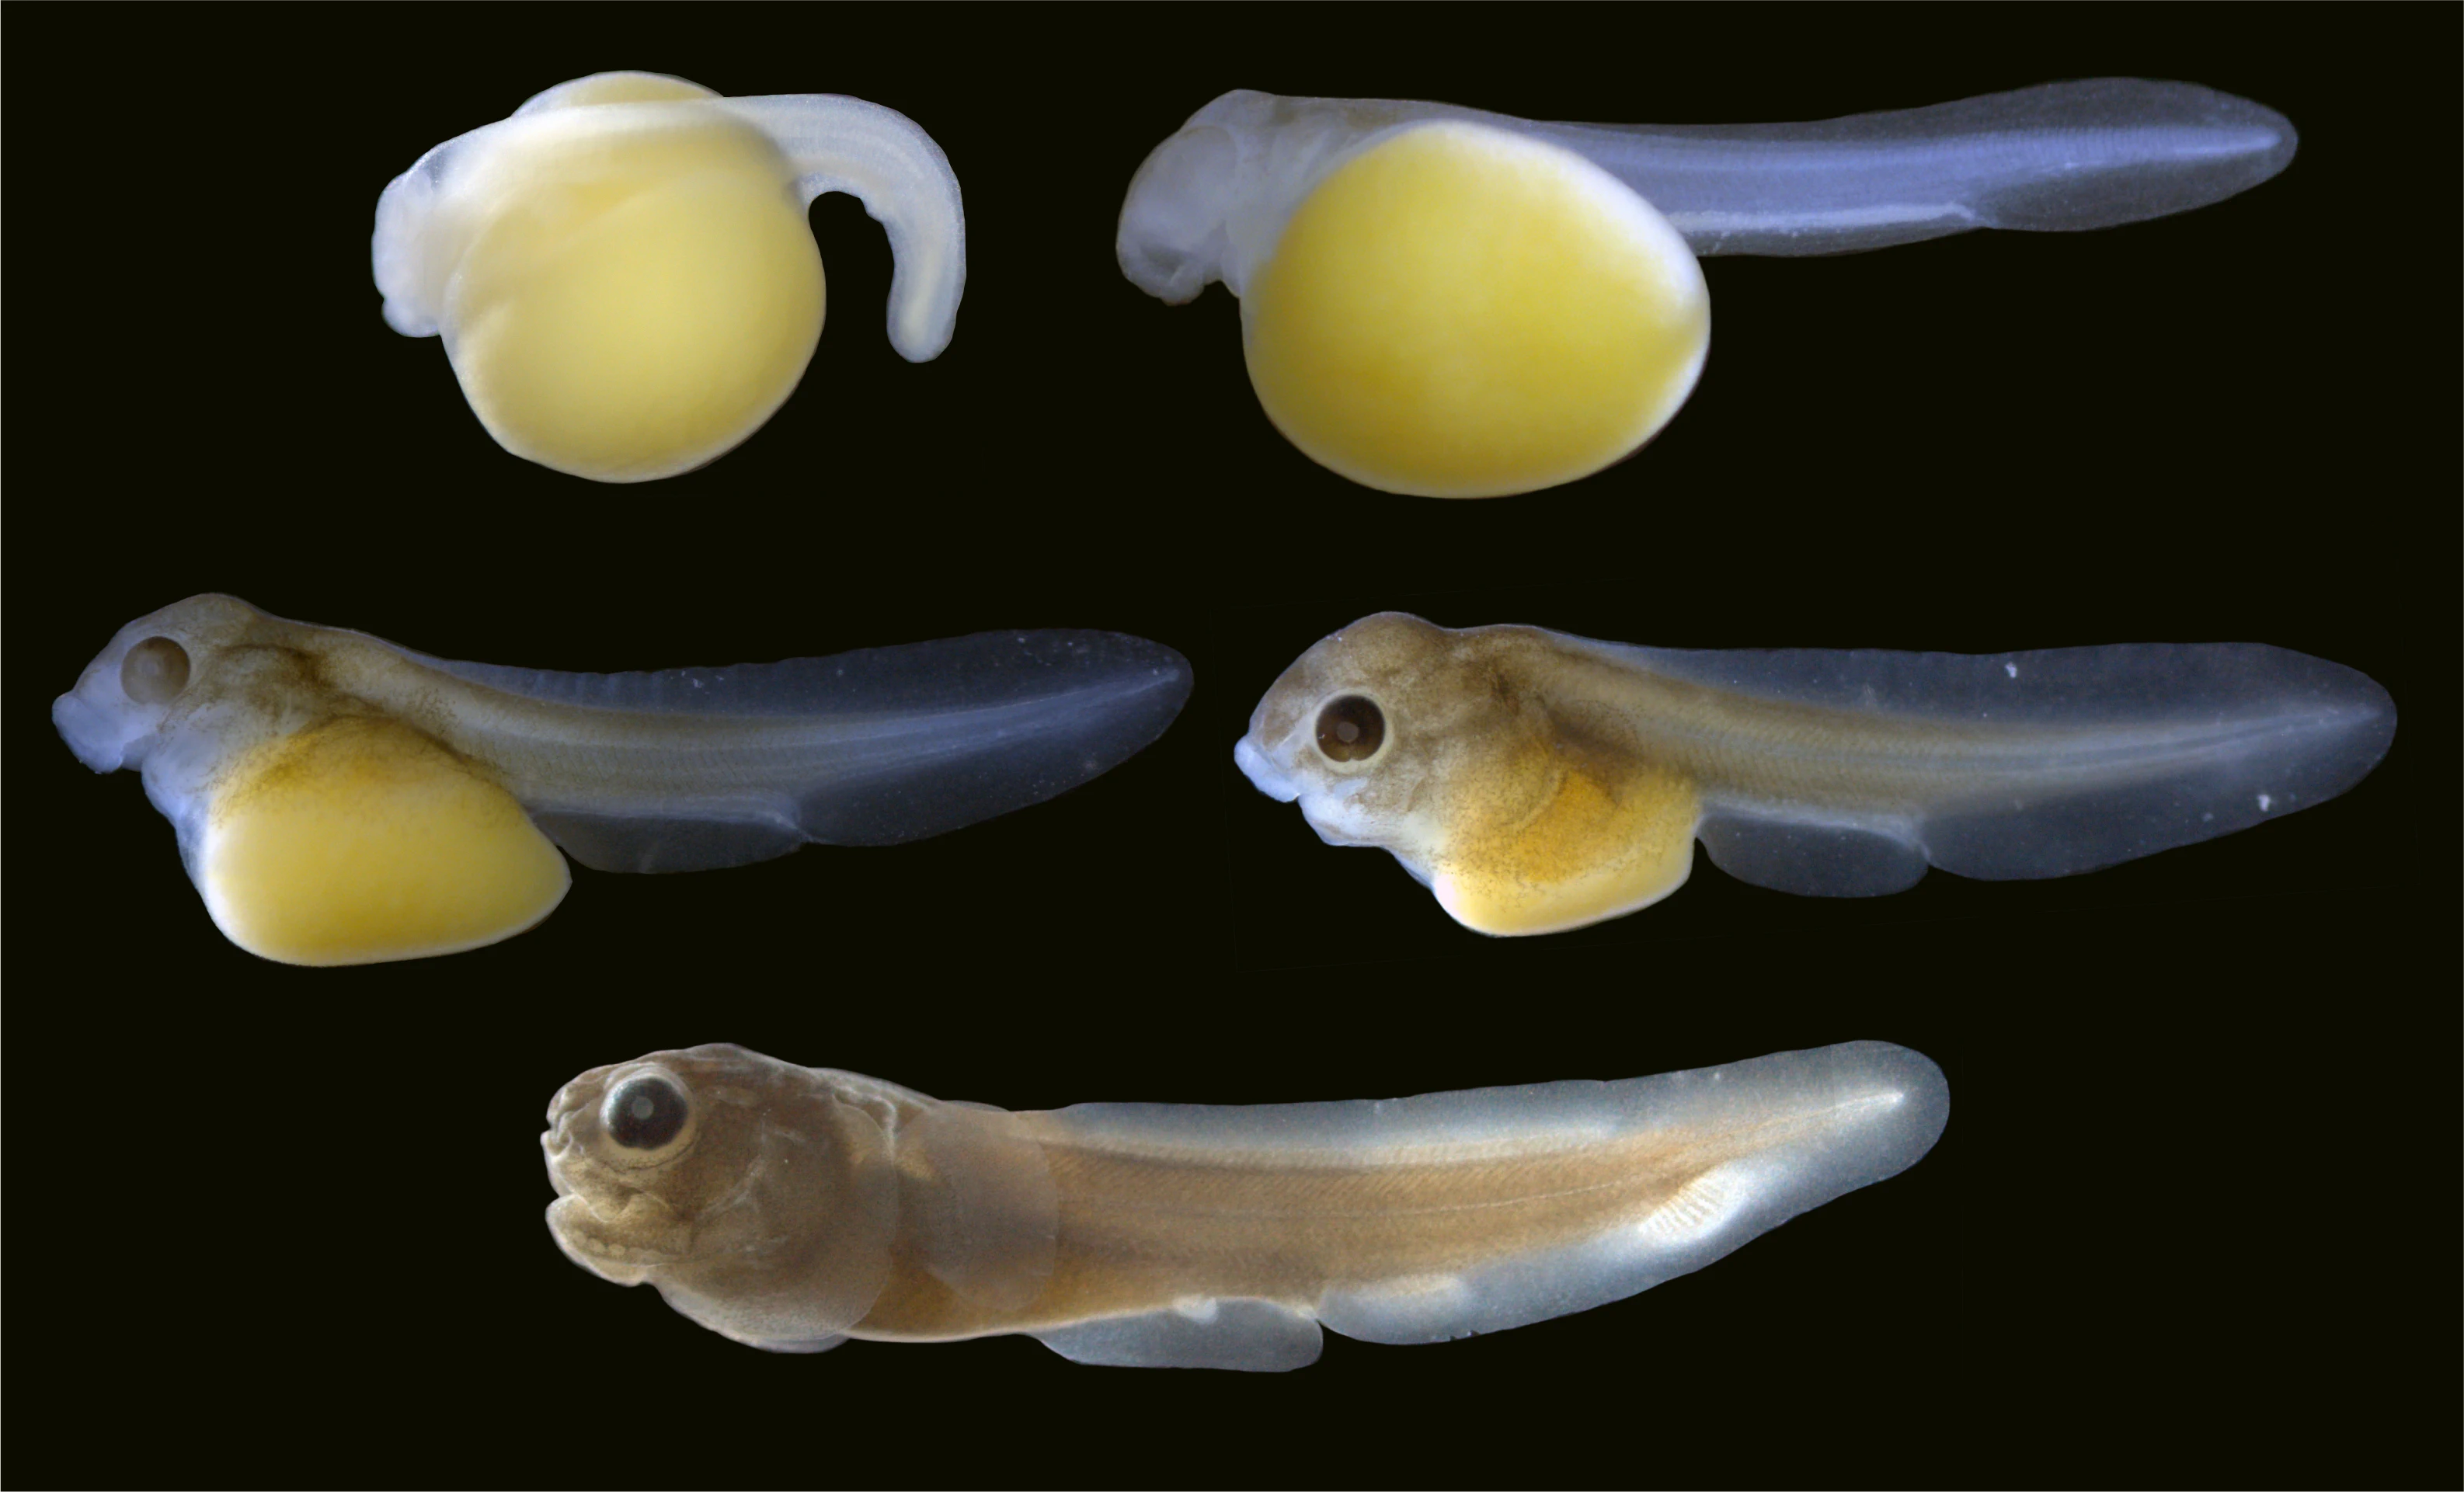 A photo against a black background shows a bowfin embryo — which looks like a yellow, yolky orb with translucent hints of a head and tail — developing into a larva. The “baby fish” is brown with a long tail, small head and big black eyes.